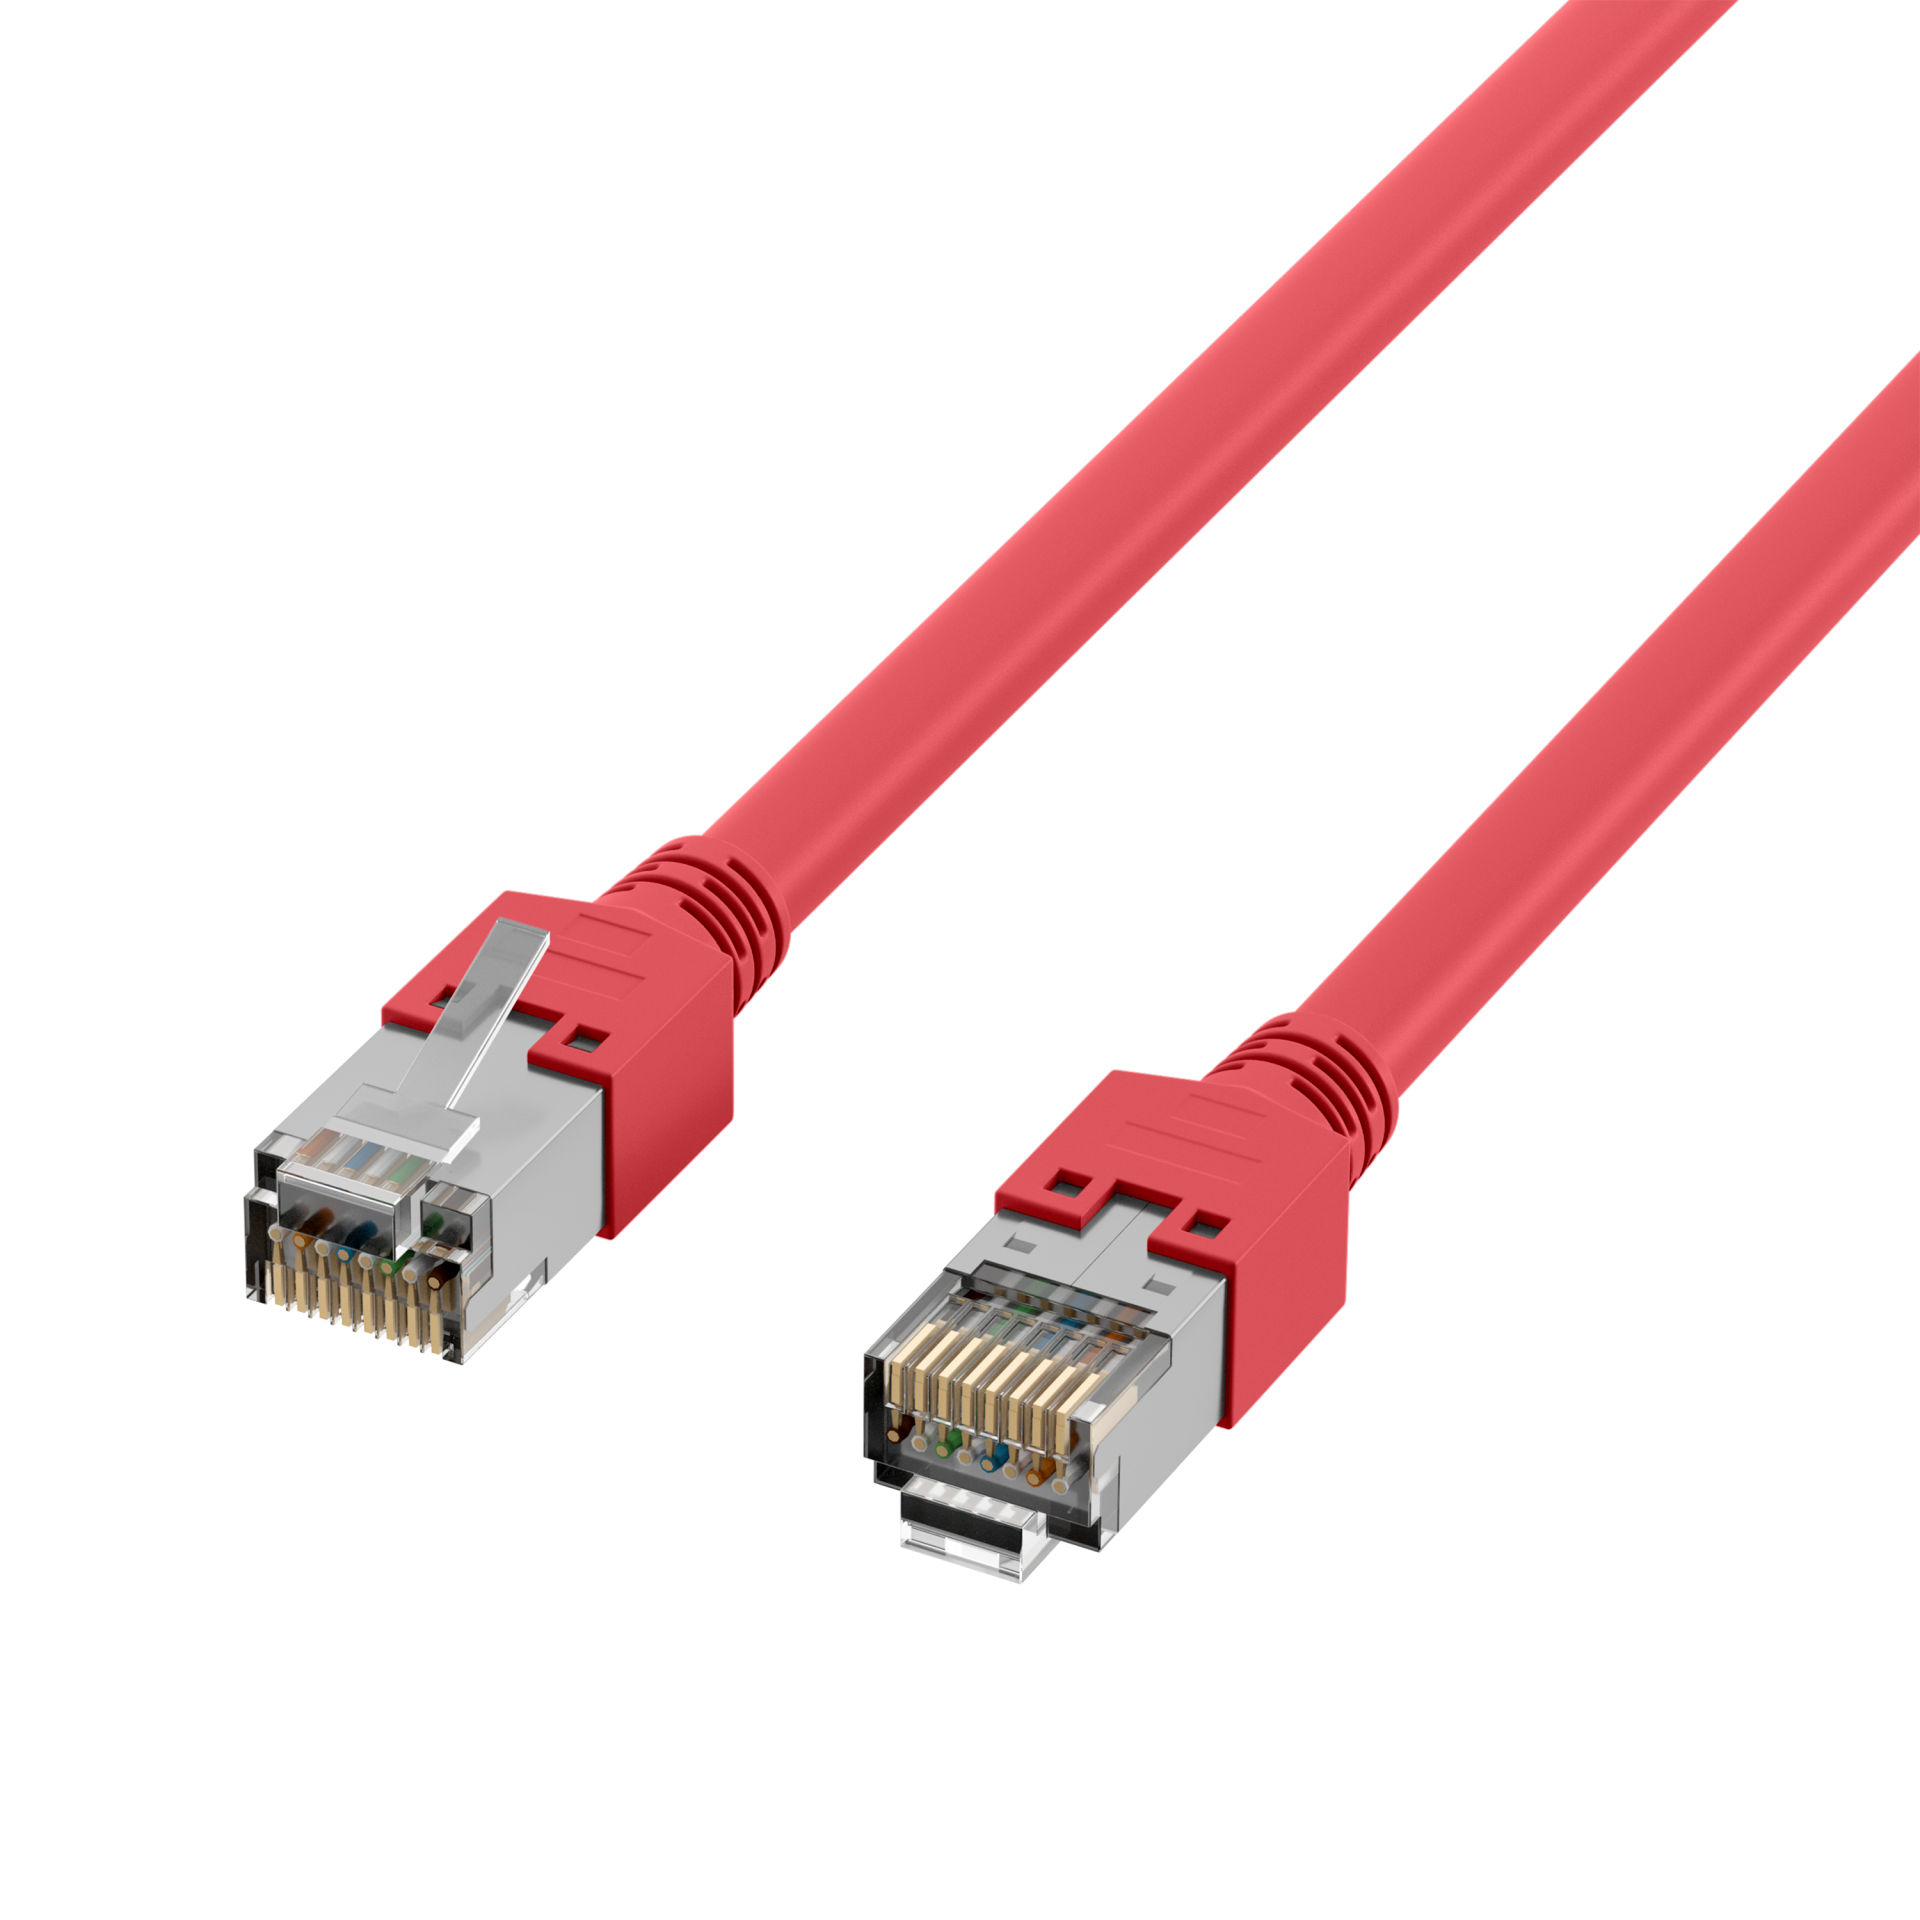 RJ45 Patch Cord Cat.5e S/UTP PVCDätwyler 5502 TM11 red 5m